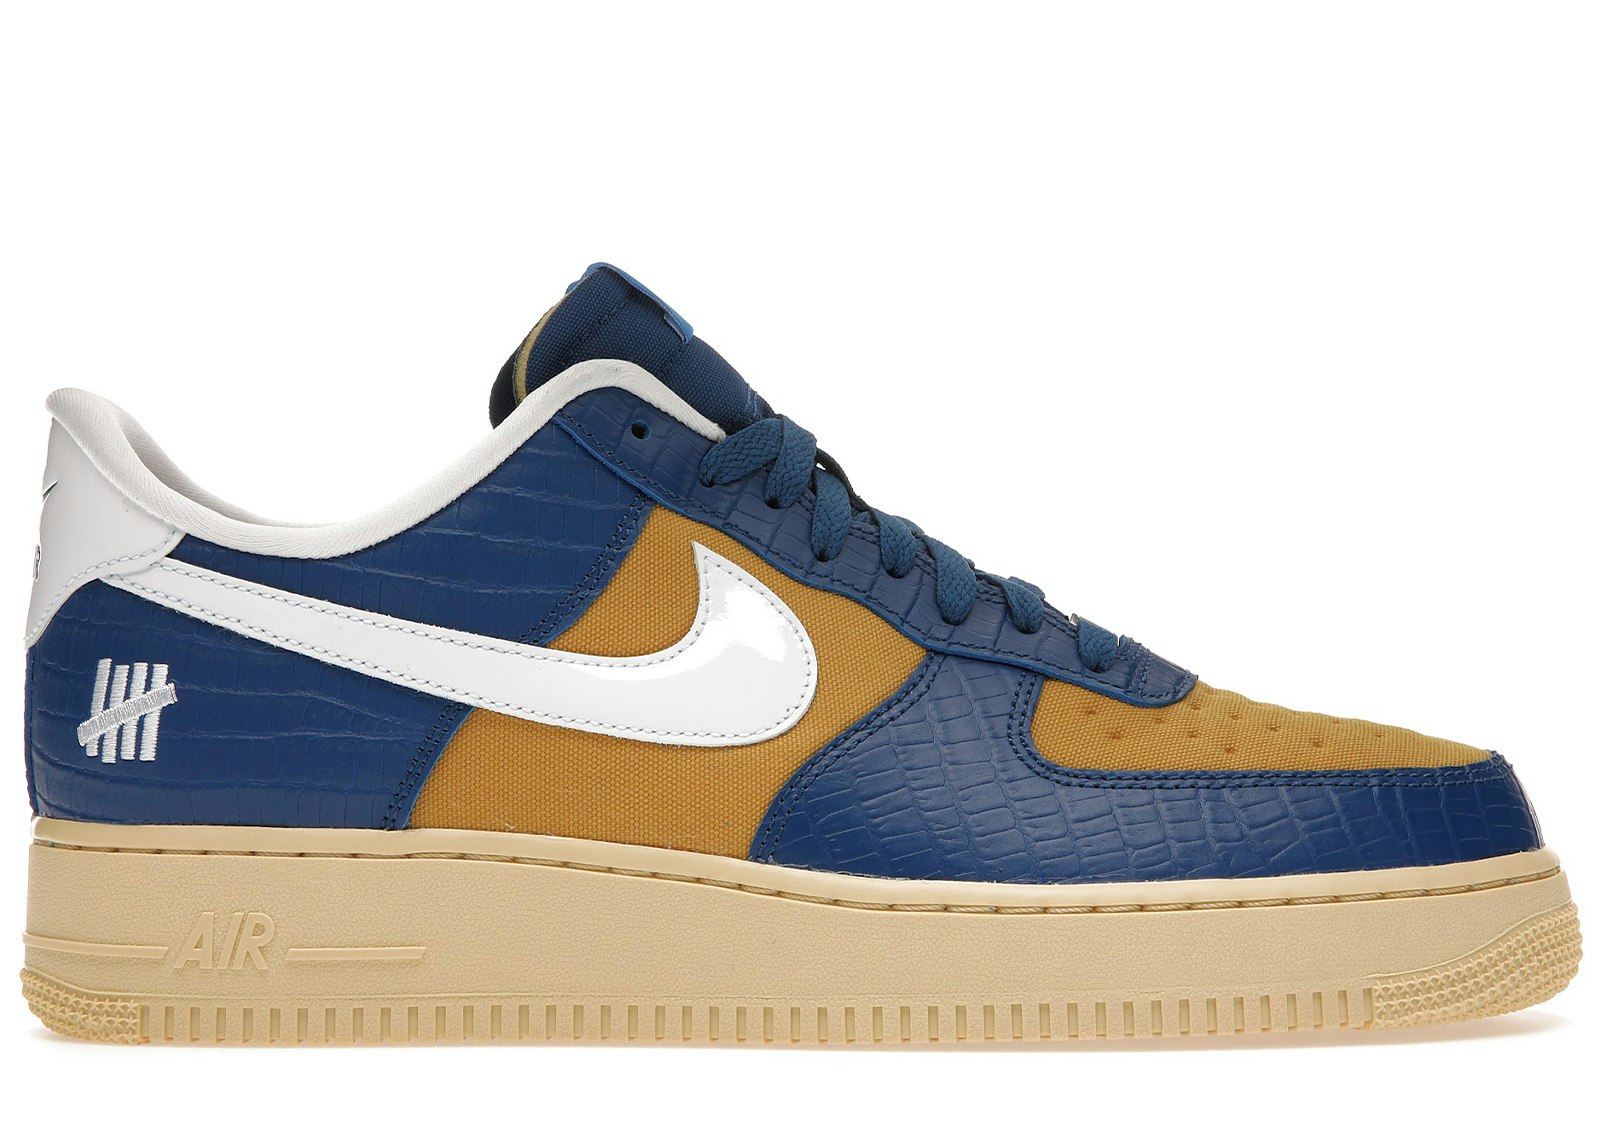 Nike Air Force Low SP Undefeated On It Blue Yellow Croc Men's  DM8462-400 US